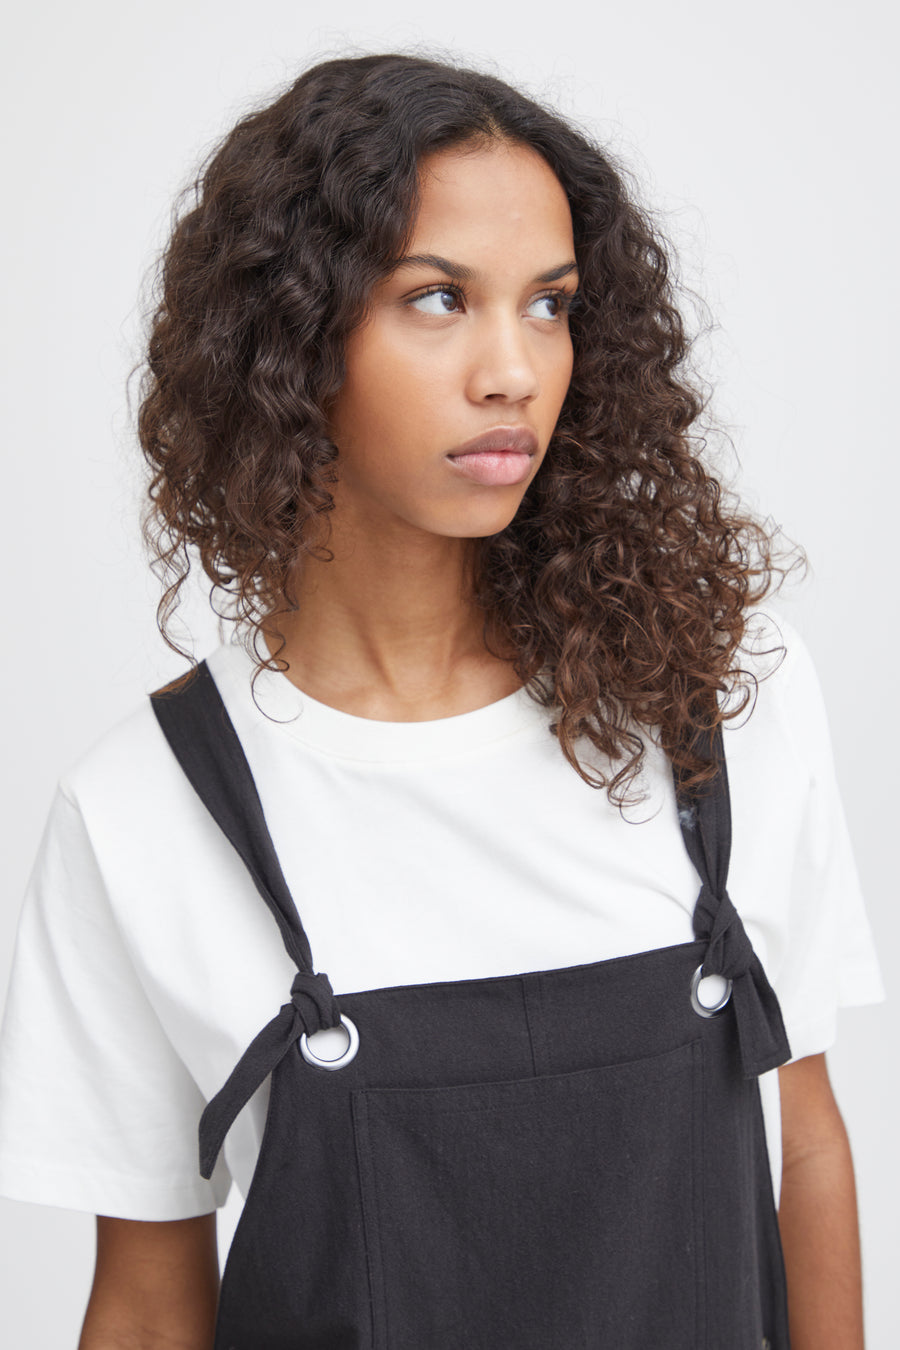 Yahya Dungarees in Black